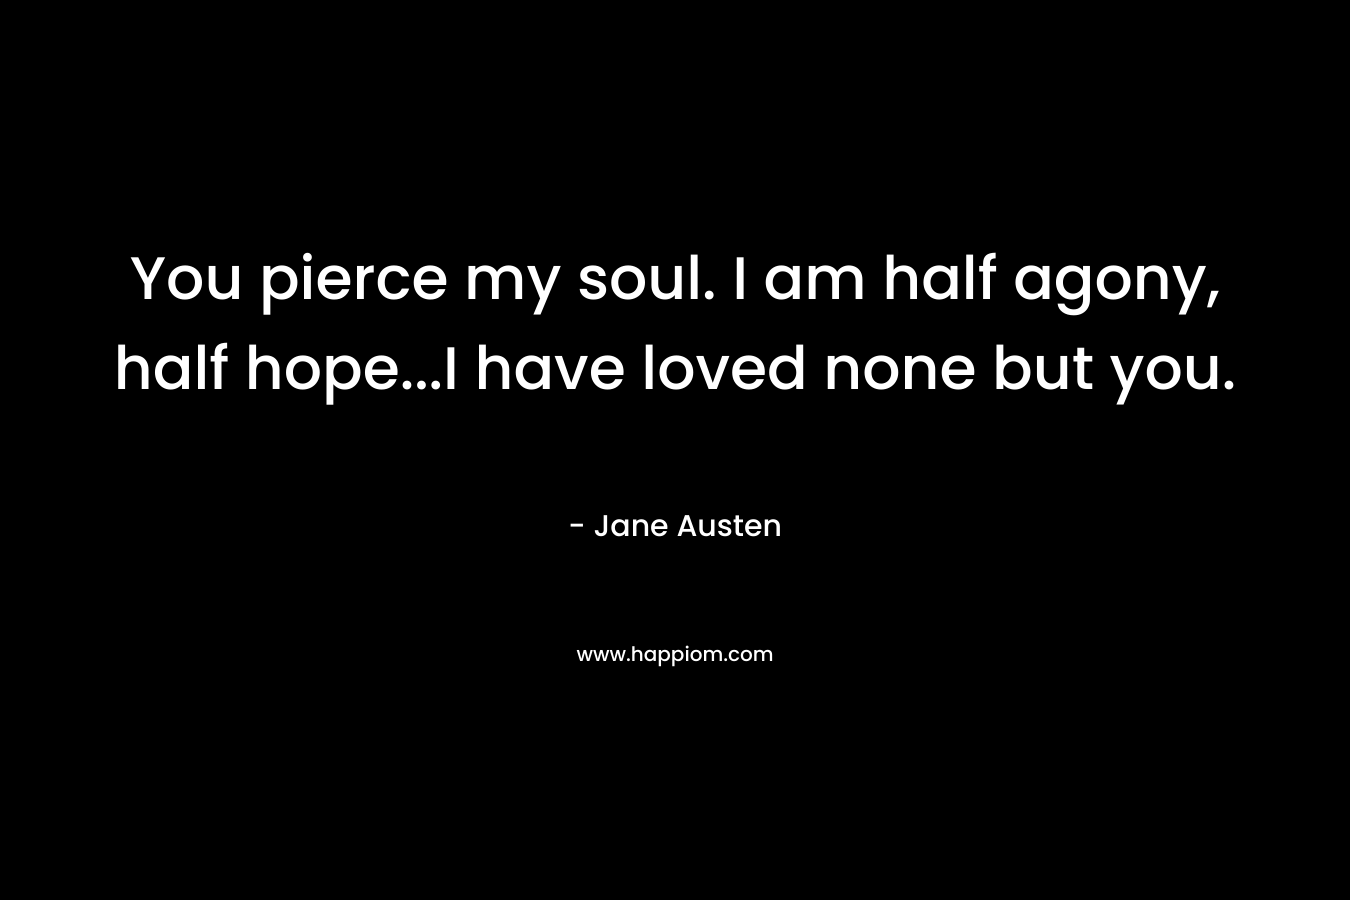 You pierce my soul. I am half agony, half hope…I have loved none but you. – Jane Austen